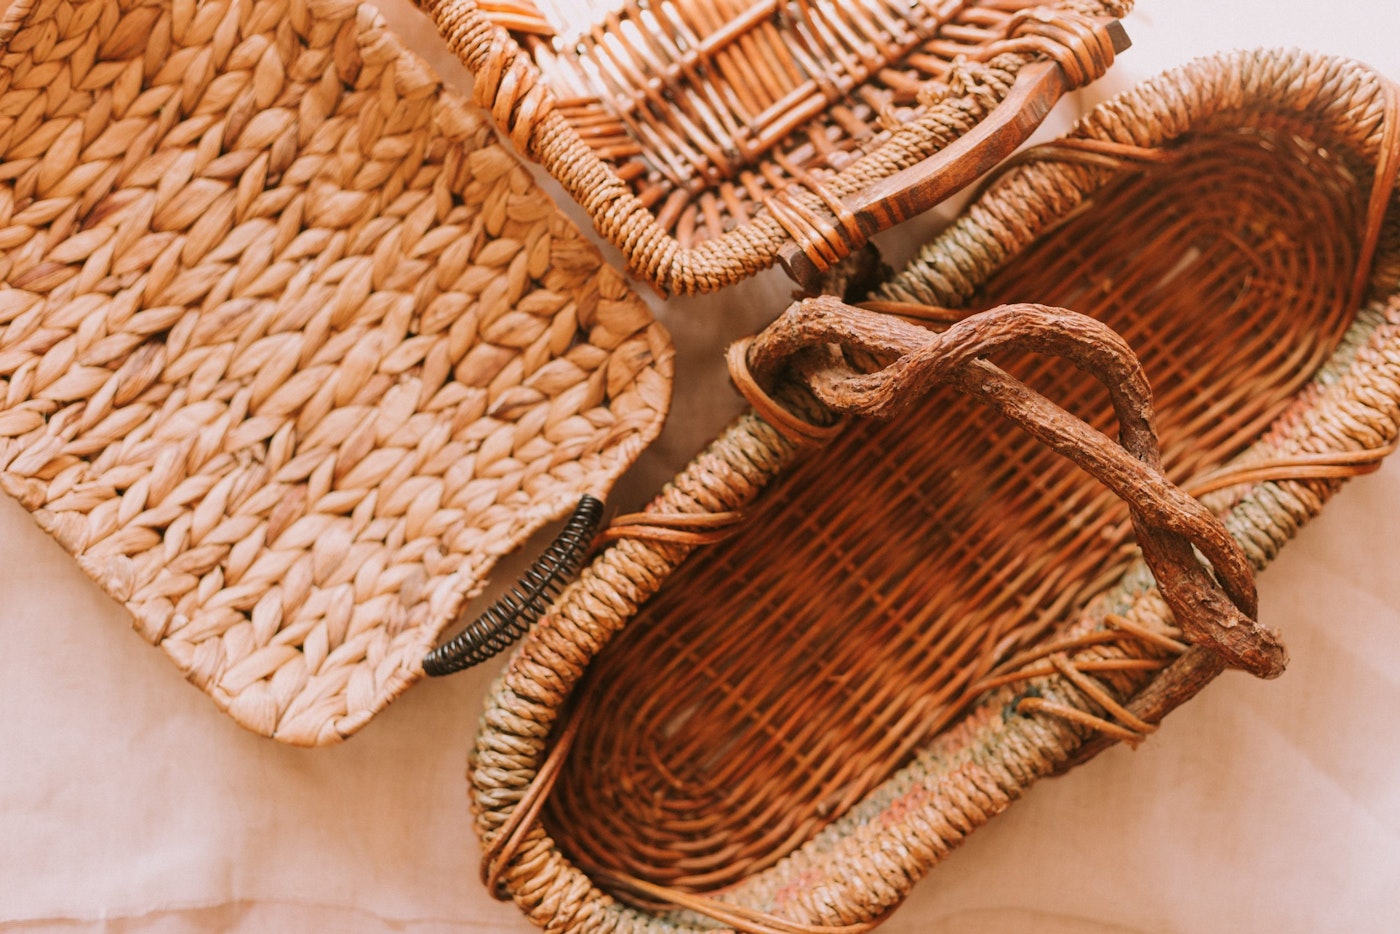 three woven baskets against brown background